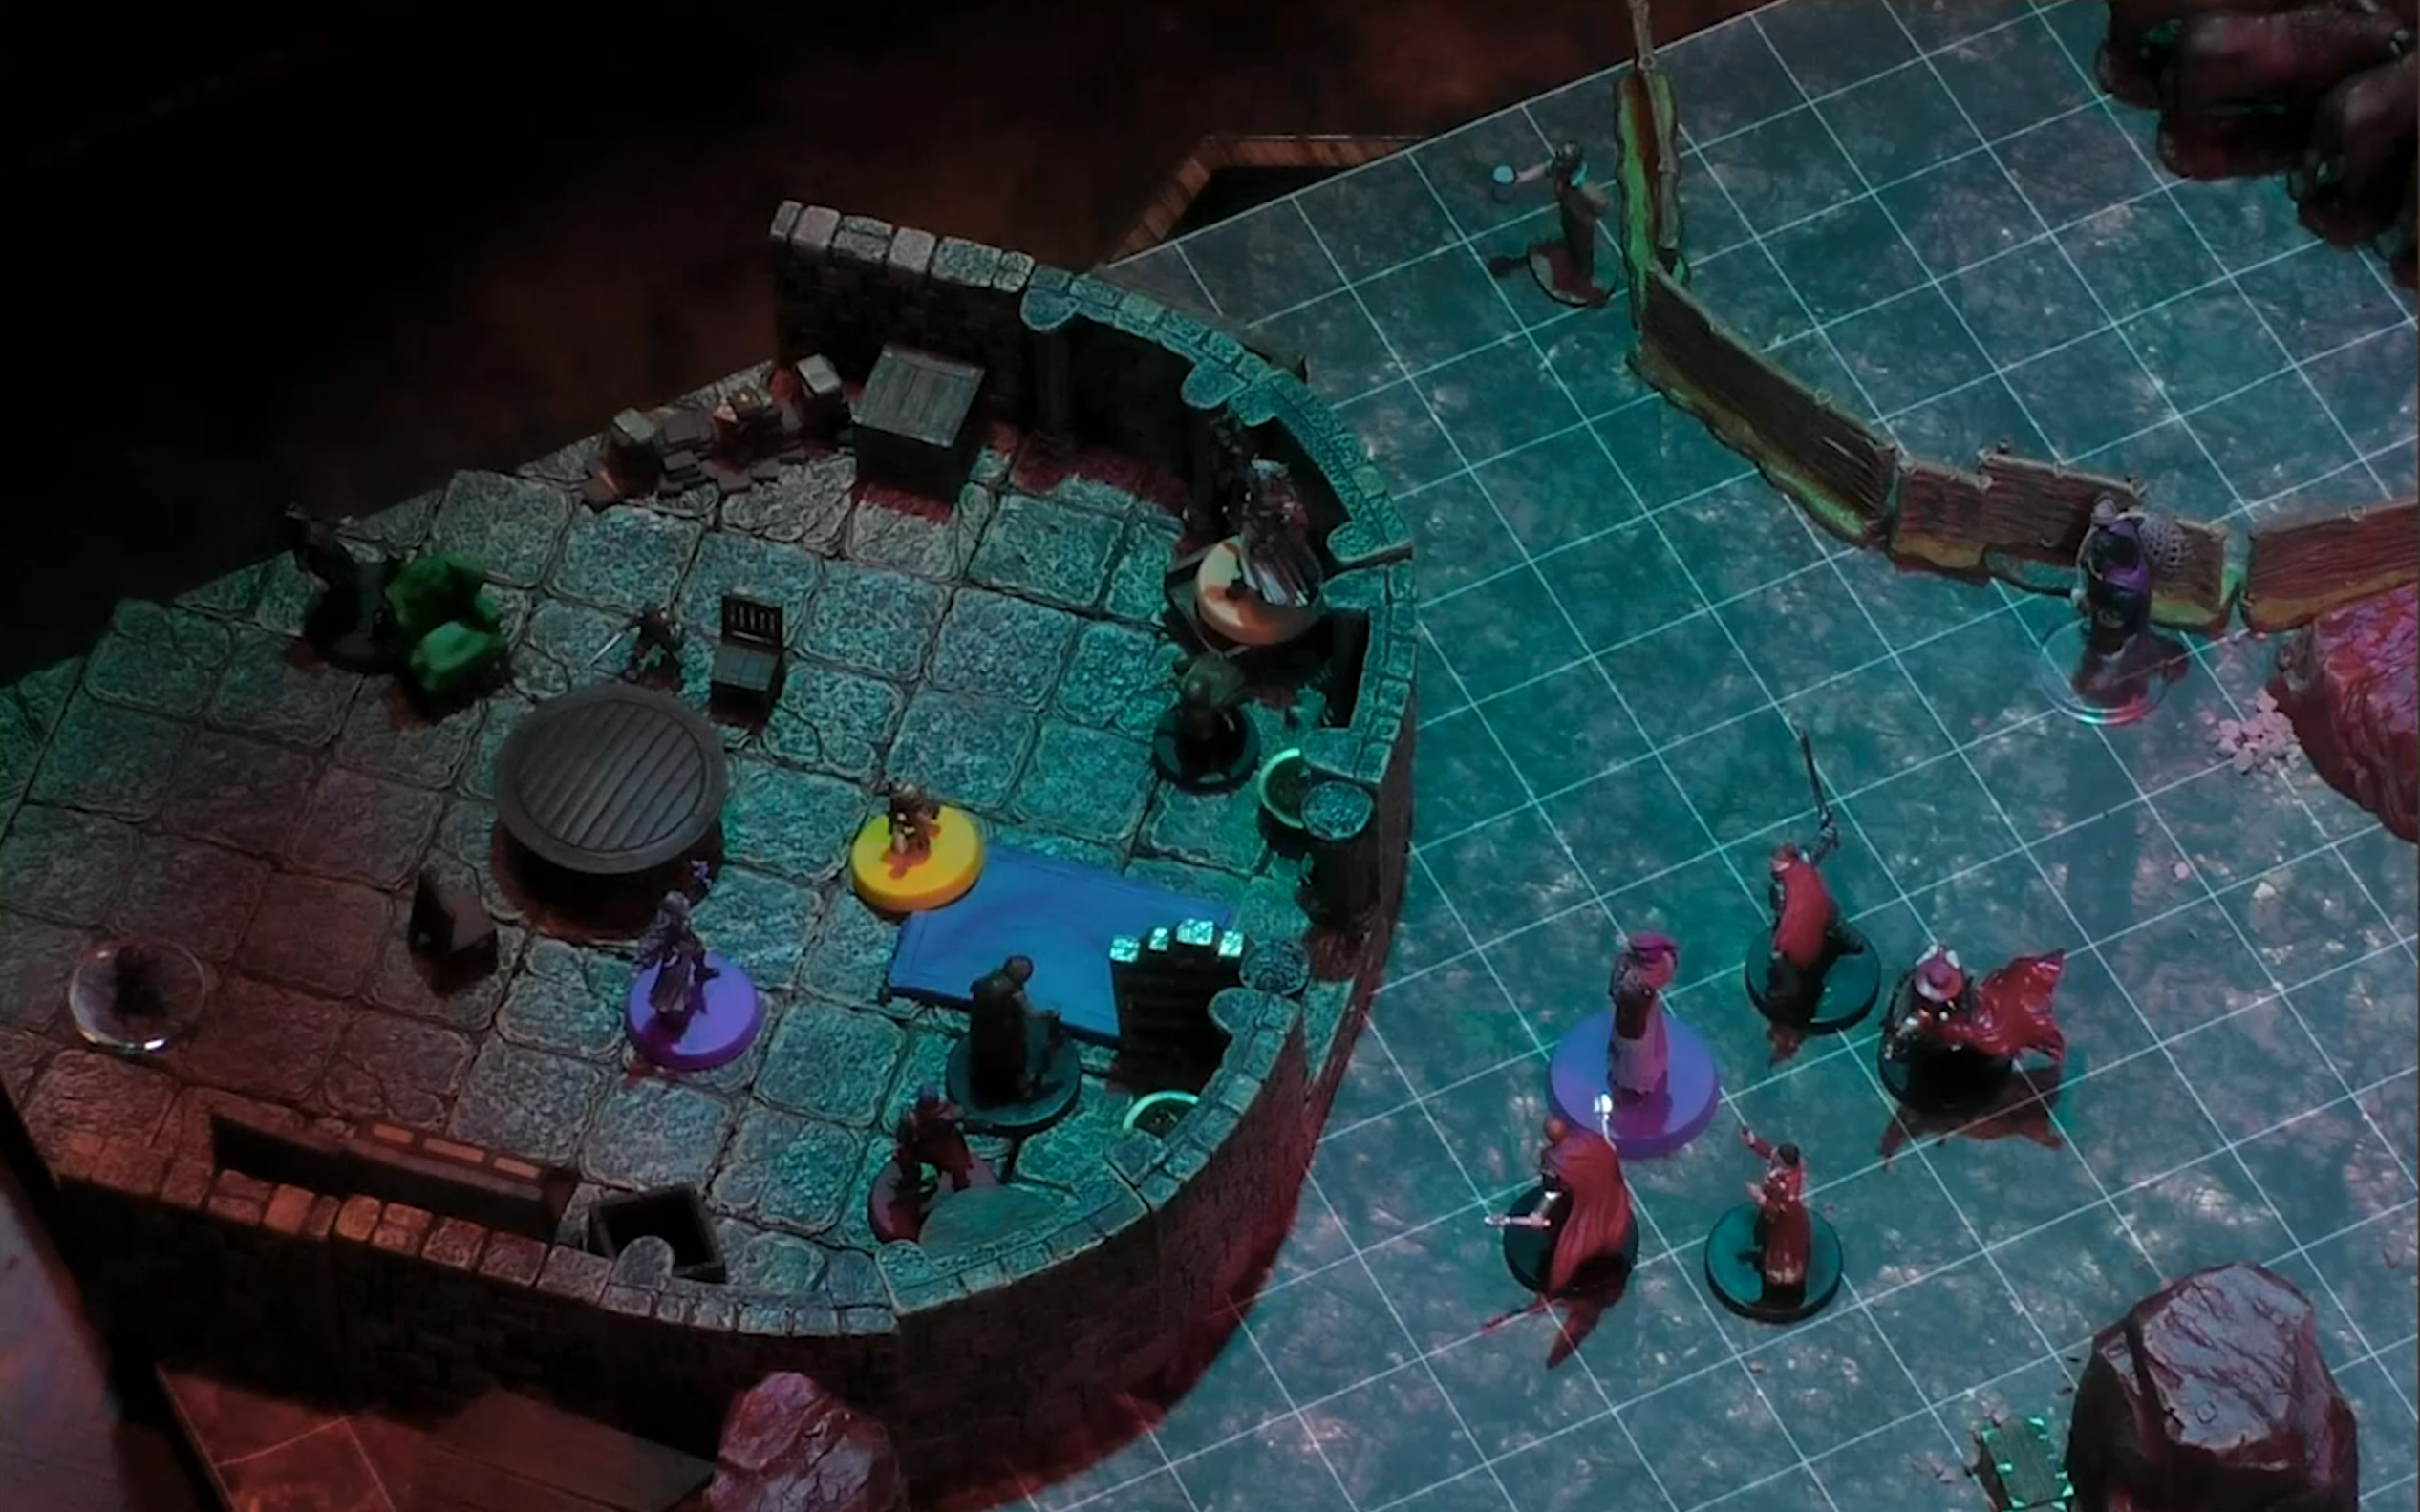 A battlemap of a rounded stone building with an expanse of flat ground outside. FCG, Orym, Imogen, Fearne (pressed against a wall), and other tokens are inside the building. A purple token stands outside at the entance surrounded by red-caped individuals. Two other tokens stand by a fenced area.